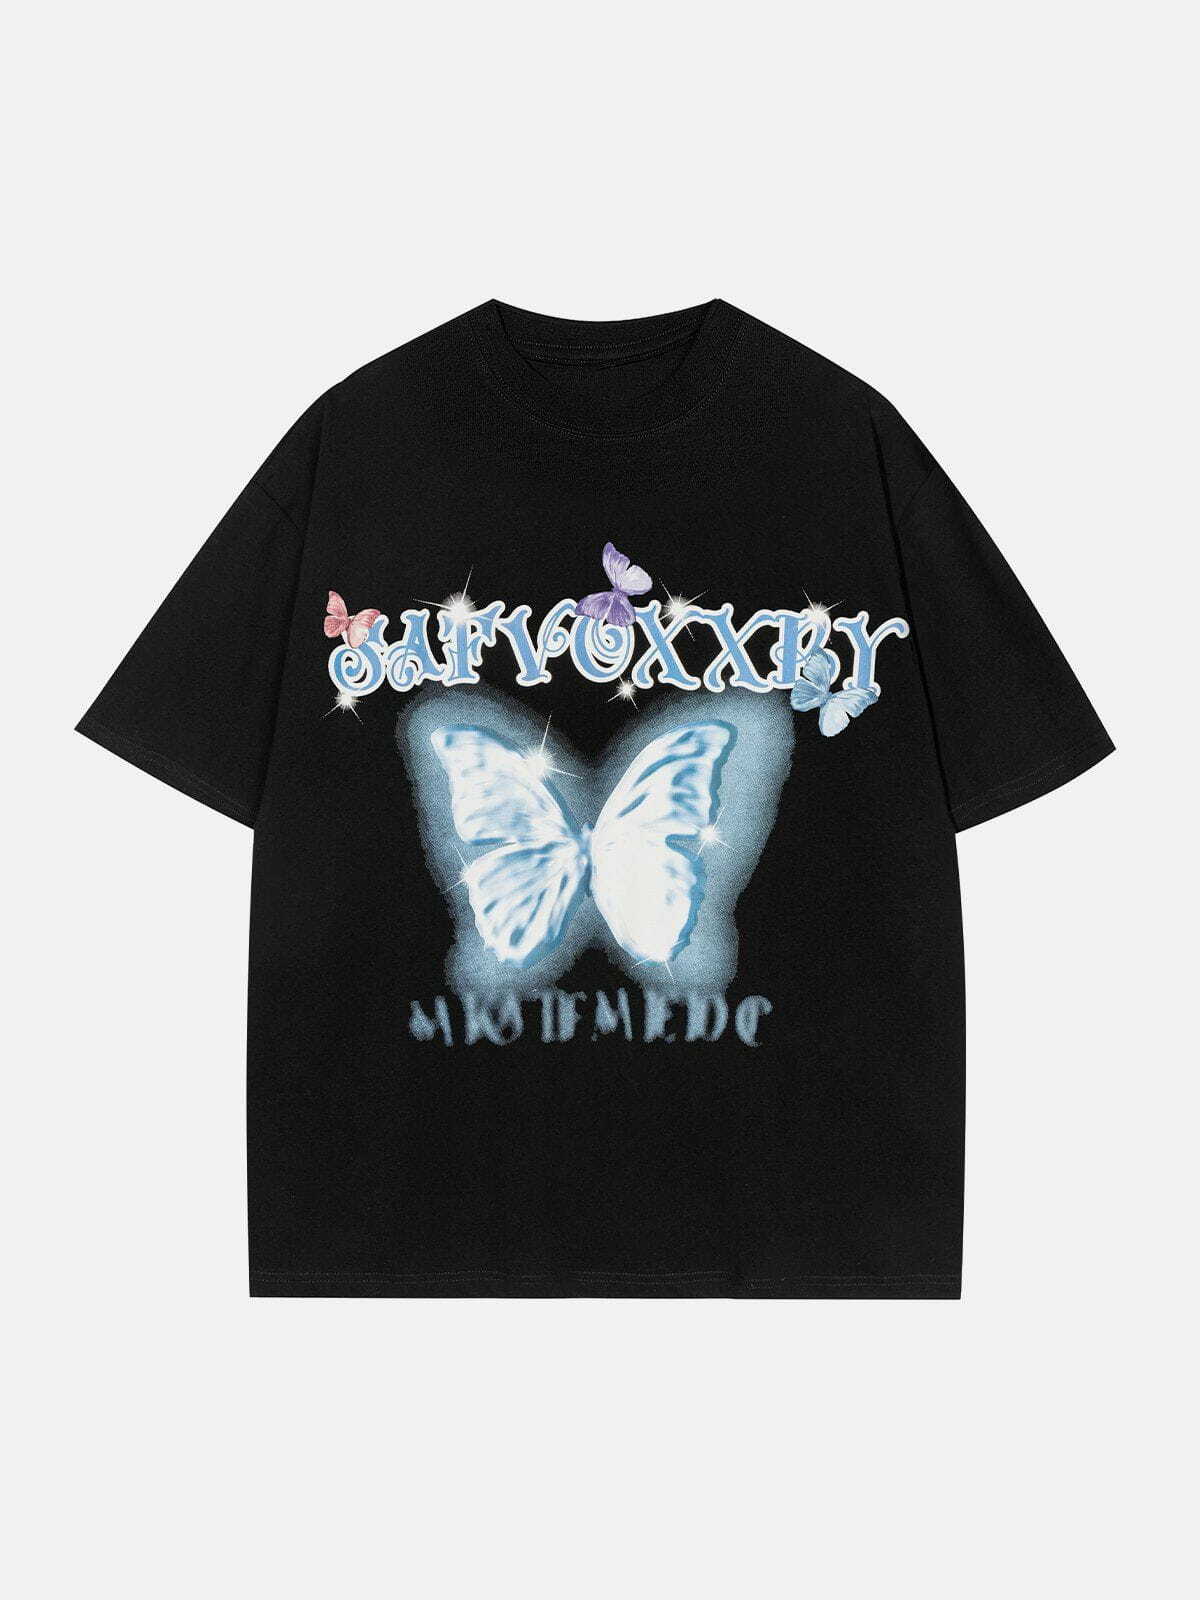 butterfly graphic tee edgy retro streetwear essential 5788